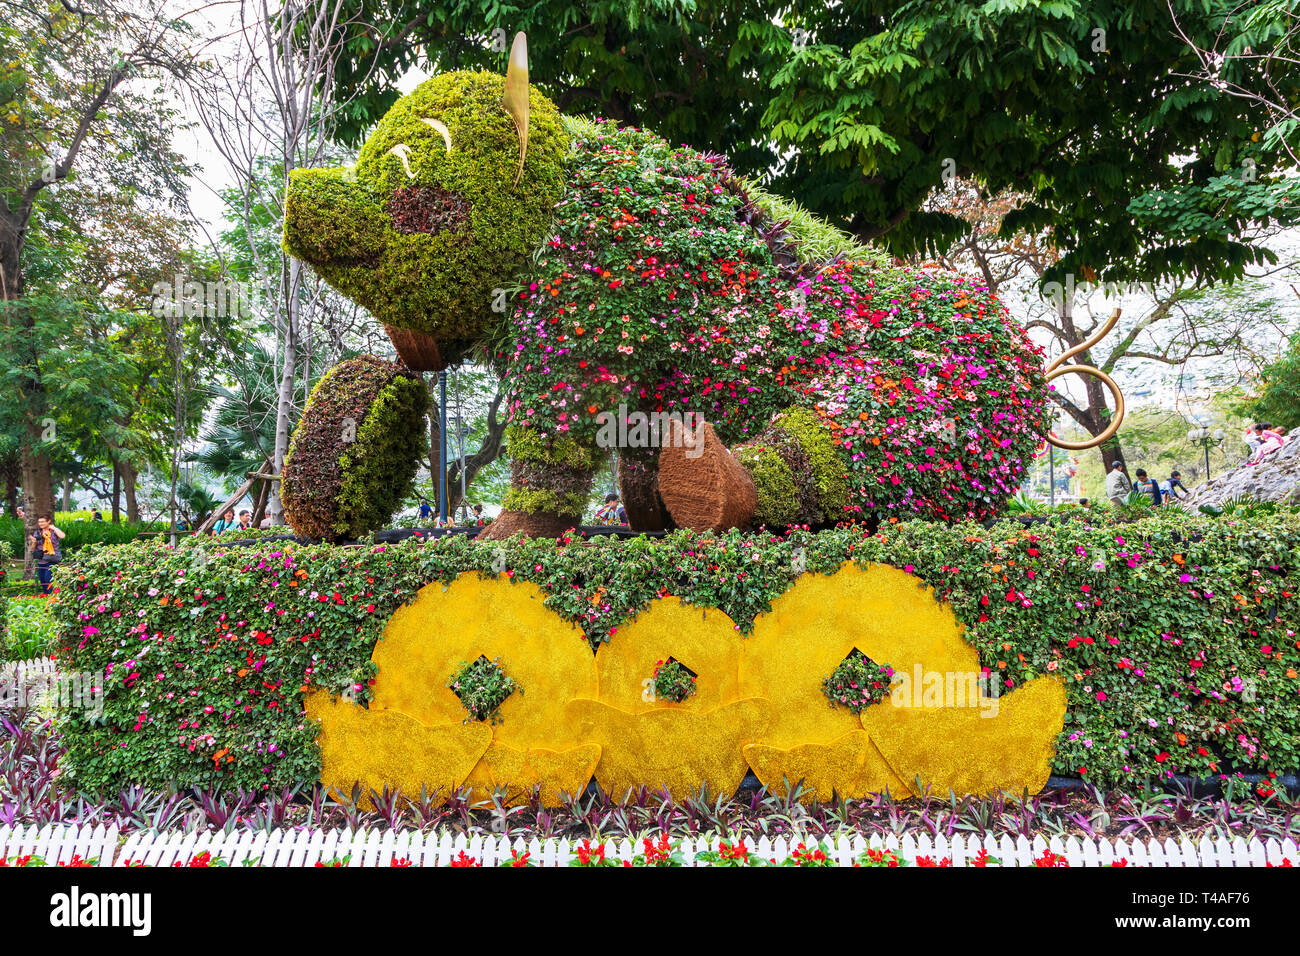 Statue of a pig as garden decoration to celebrate the year of the pig in the Vietnamese New Year, Old Quarter, Hanoi, Vietnam, Asia Stock Photo